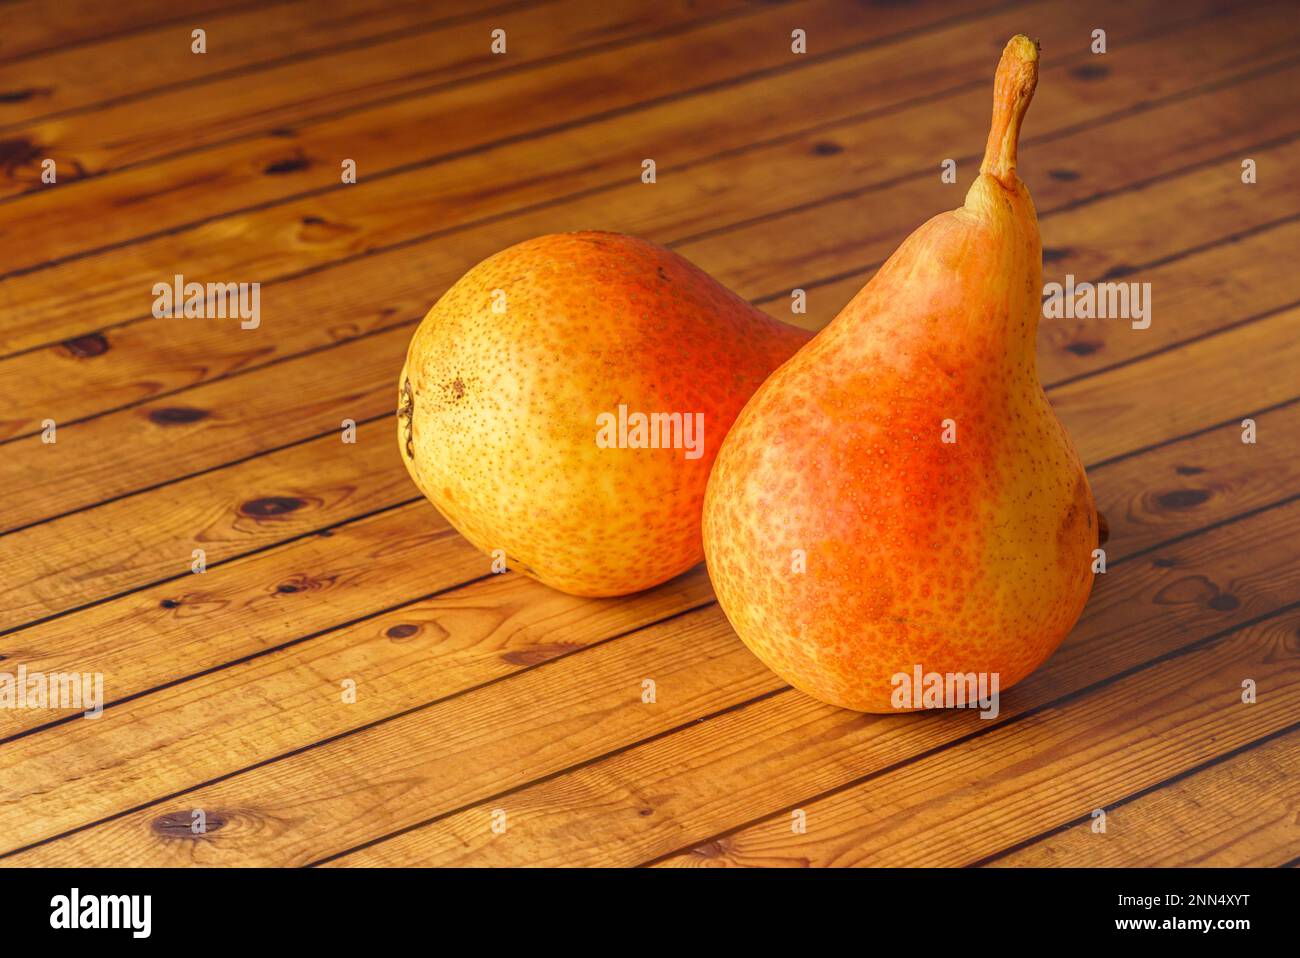 Delicious Williams or Bartlett pears on a rustic wooden kitchen table Stock Photo